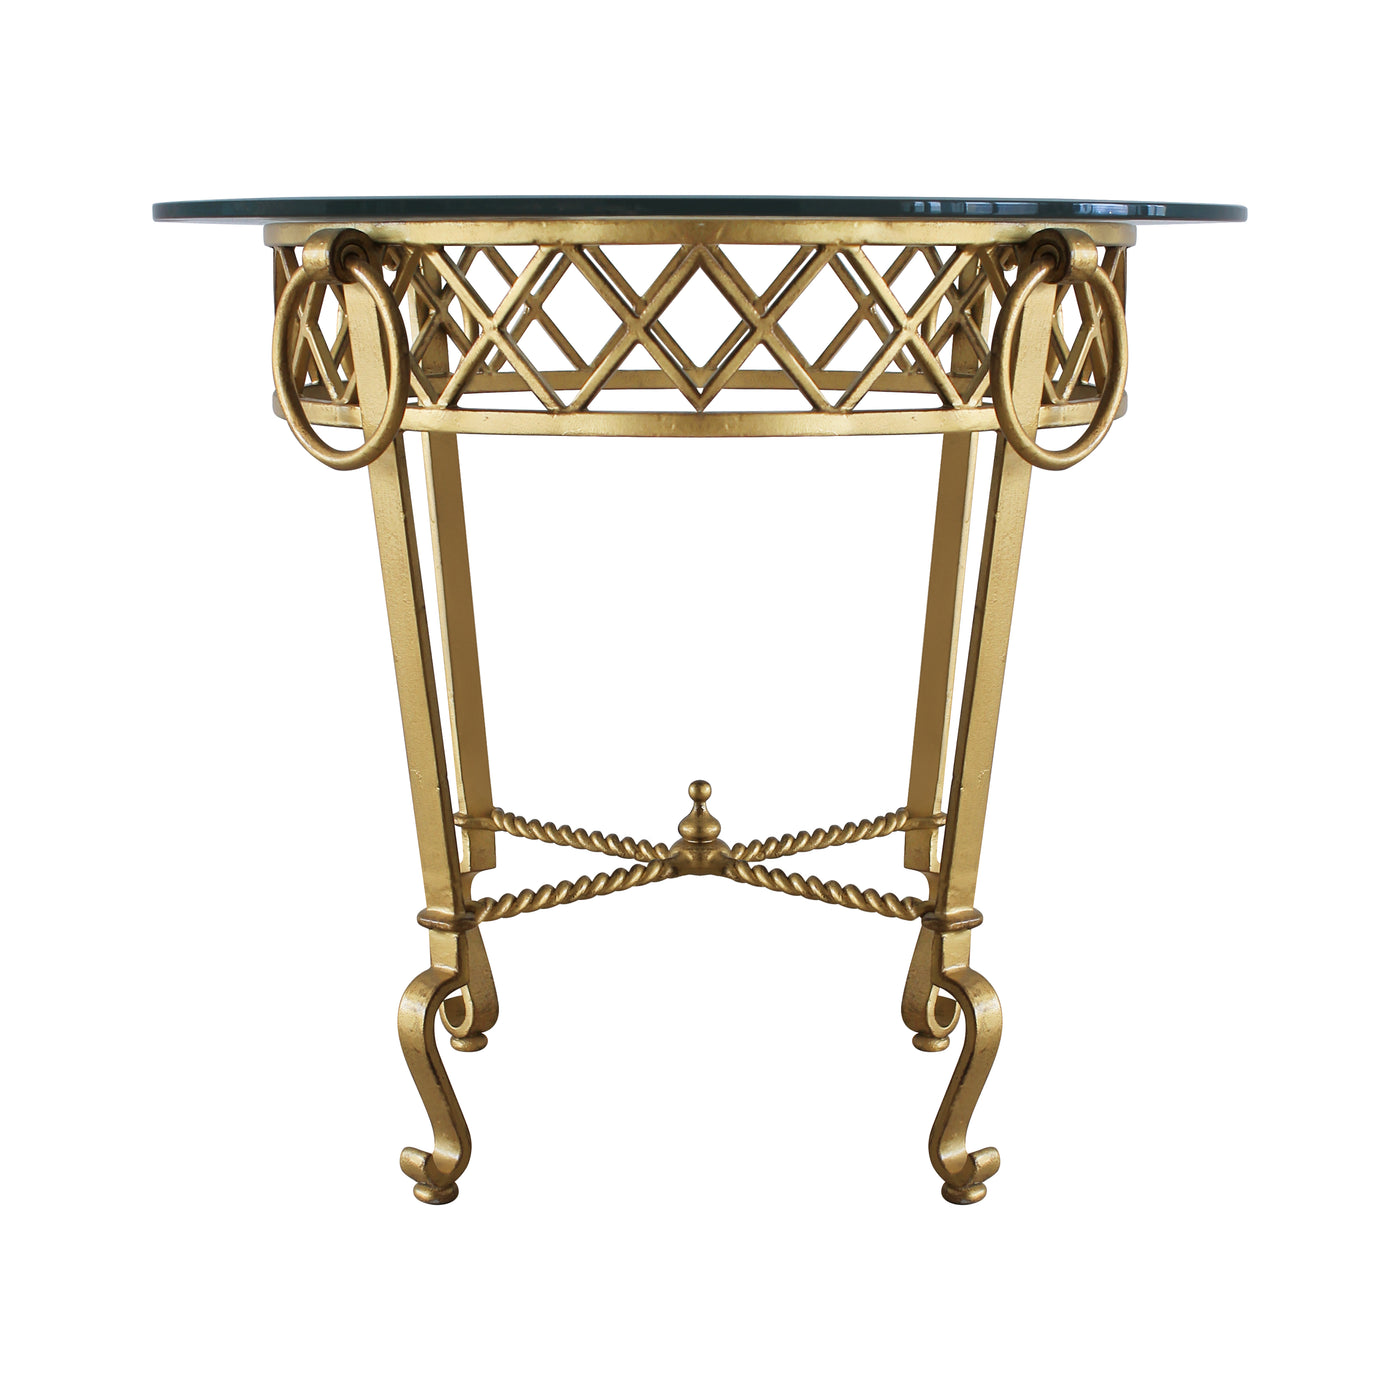 Frontal view of a classical wrought iron table painted in antique gold finish and topped with clear glass